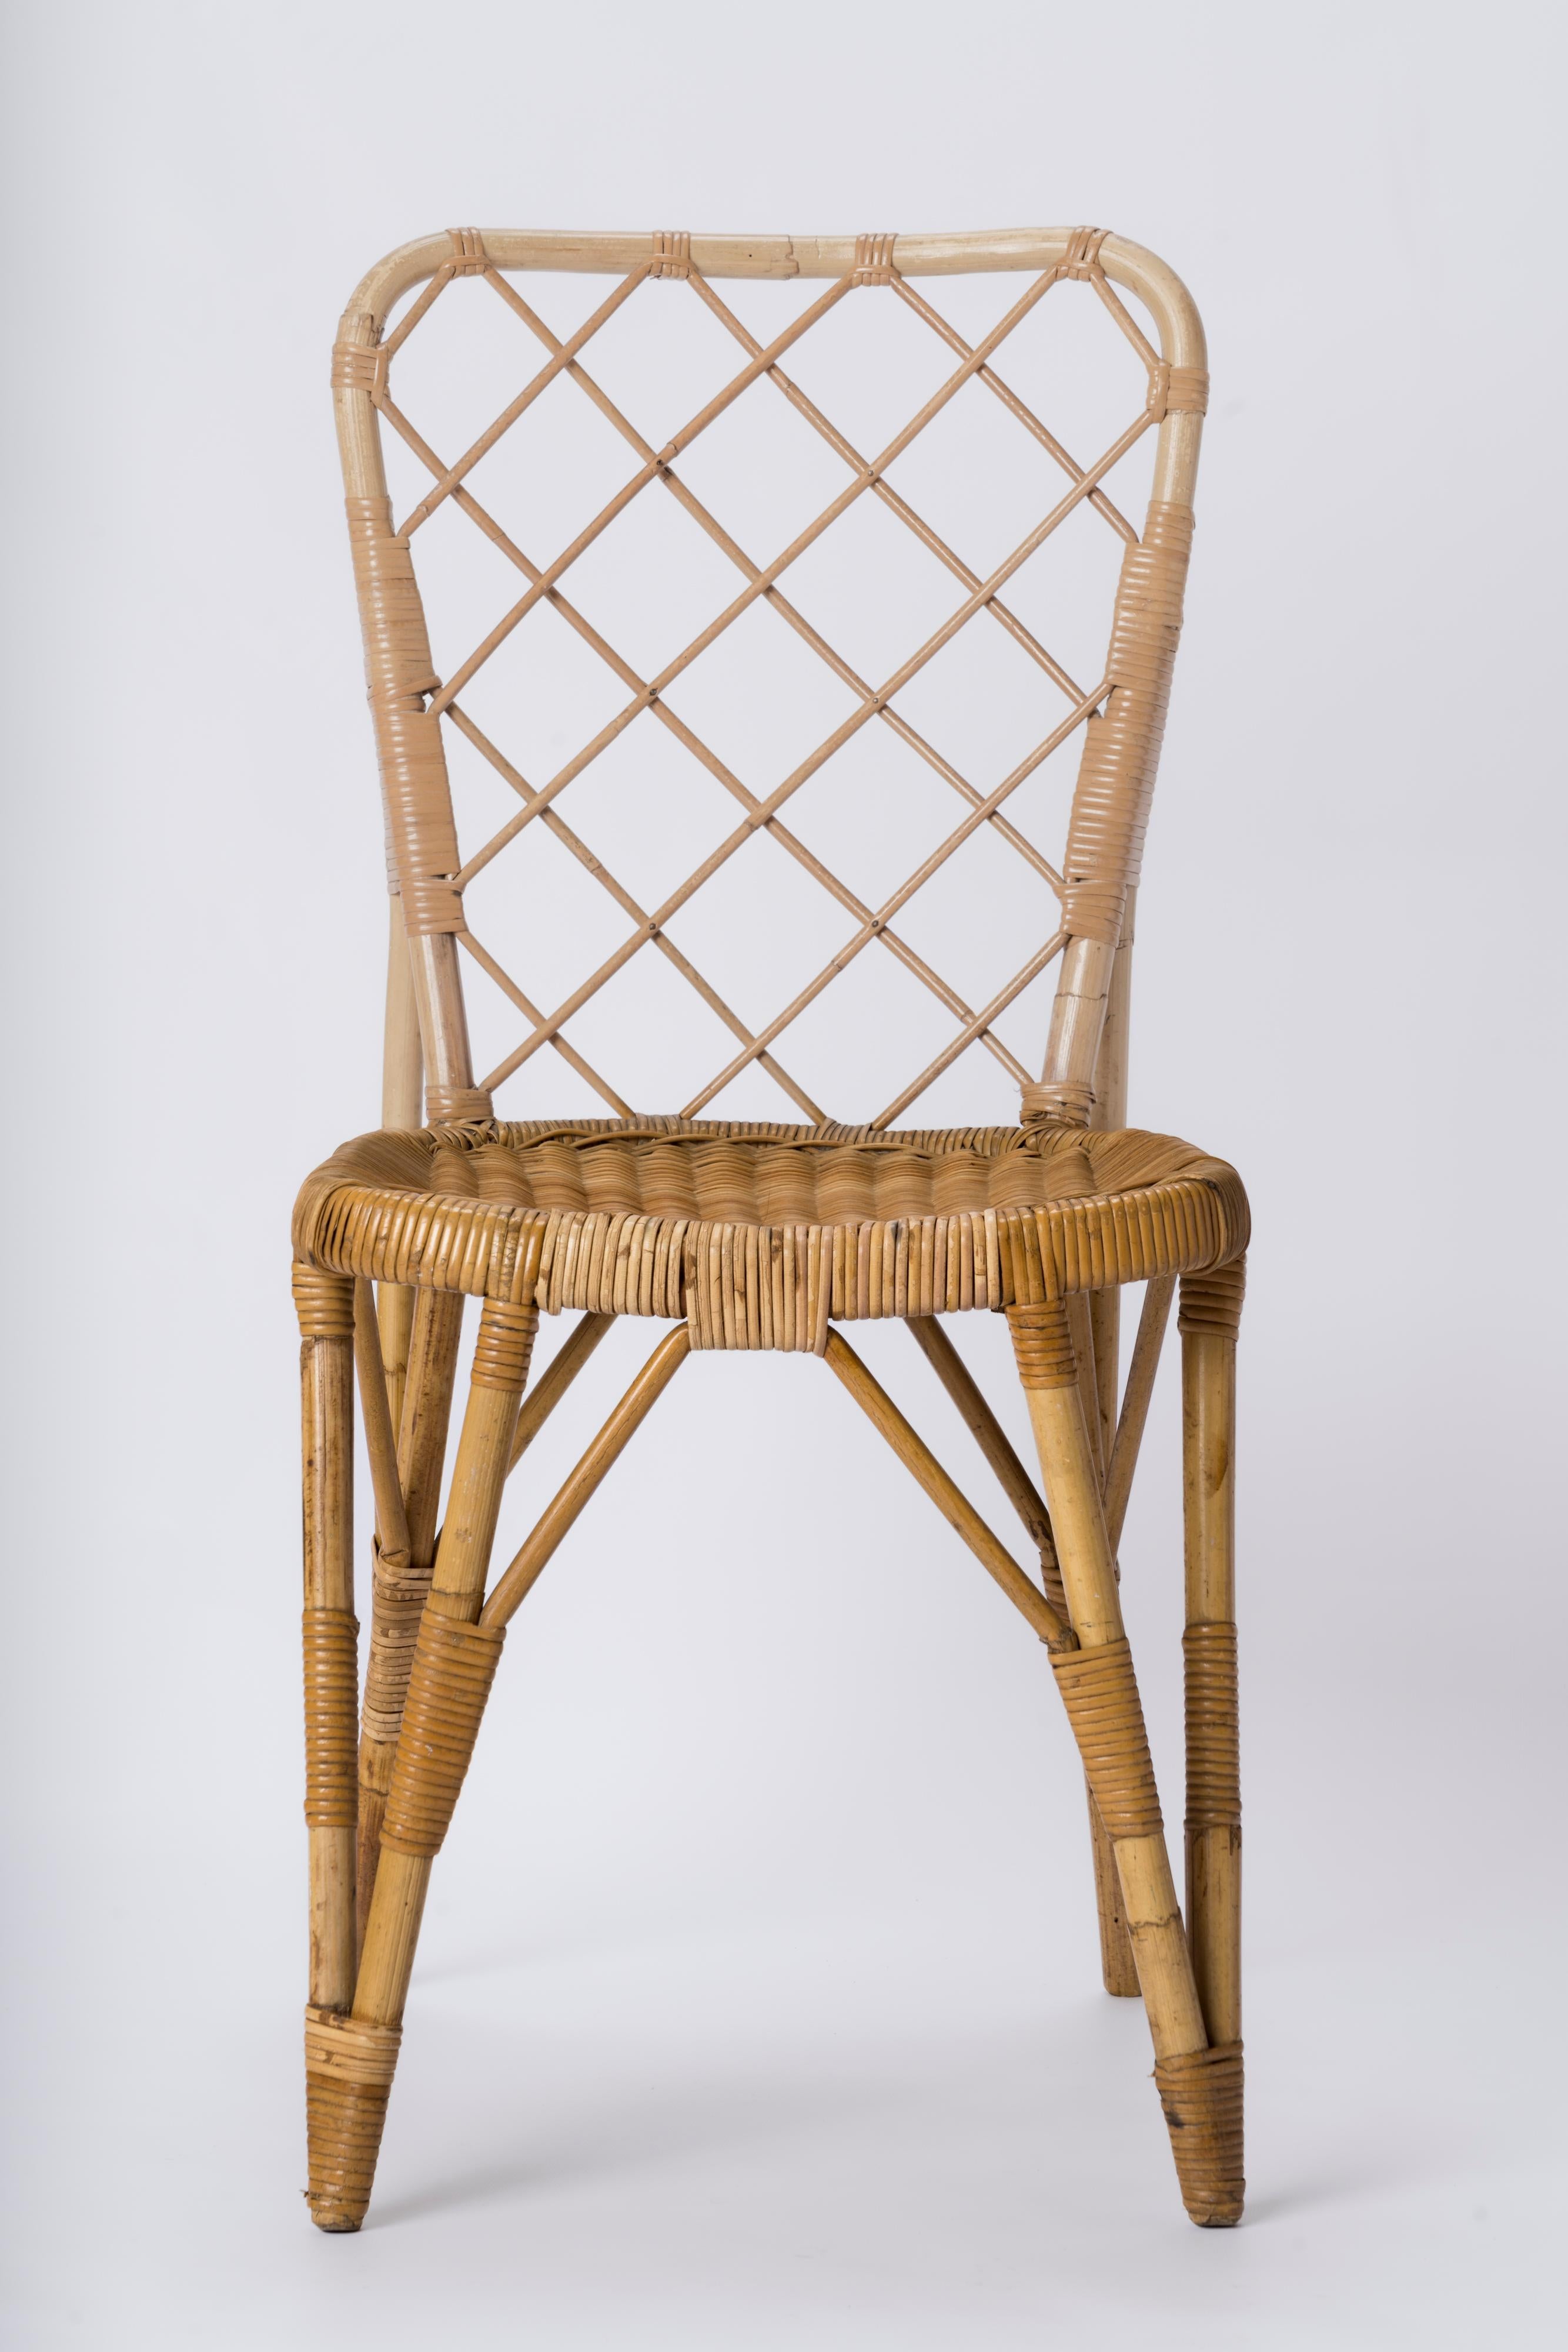 French Rattan Chair with Braided Back in the style of Louis Sognot - France 1960's For Sale